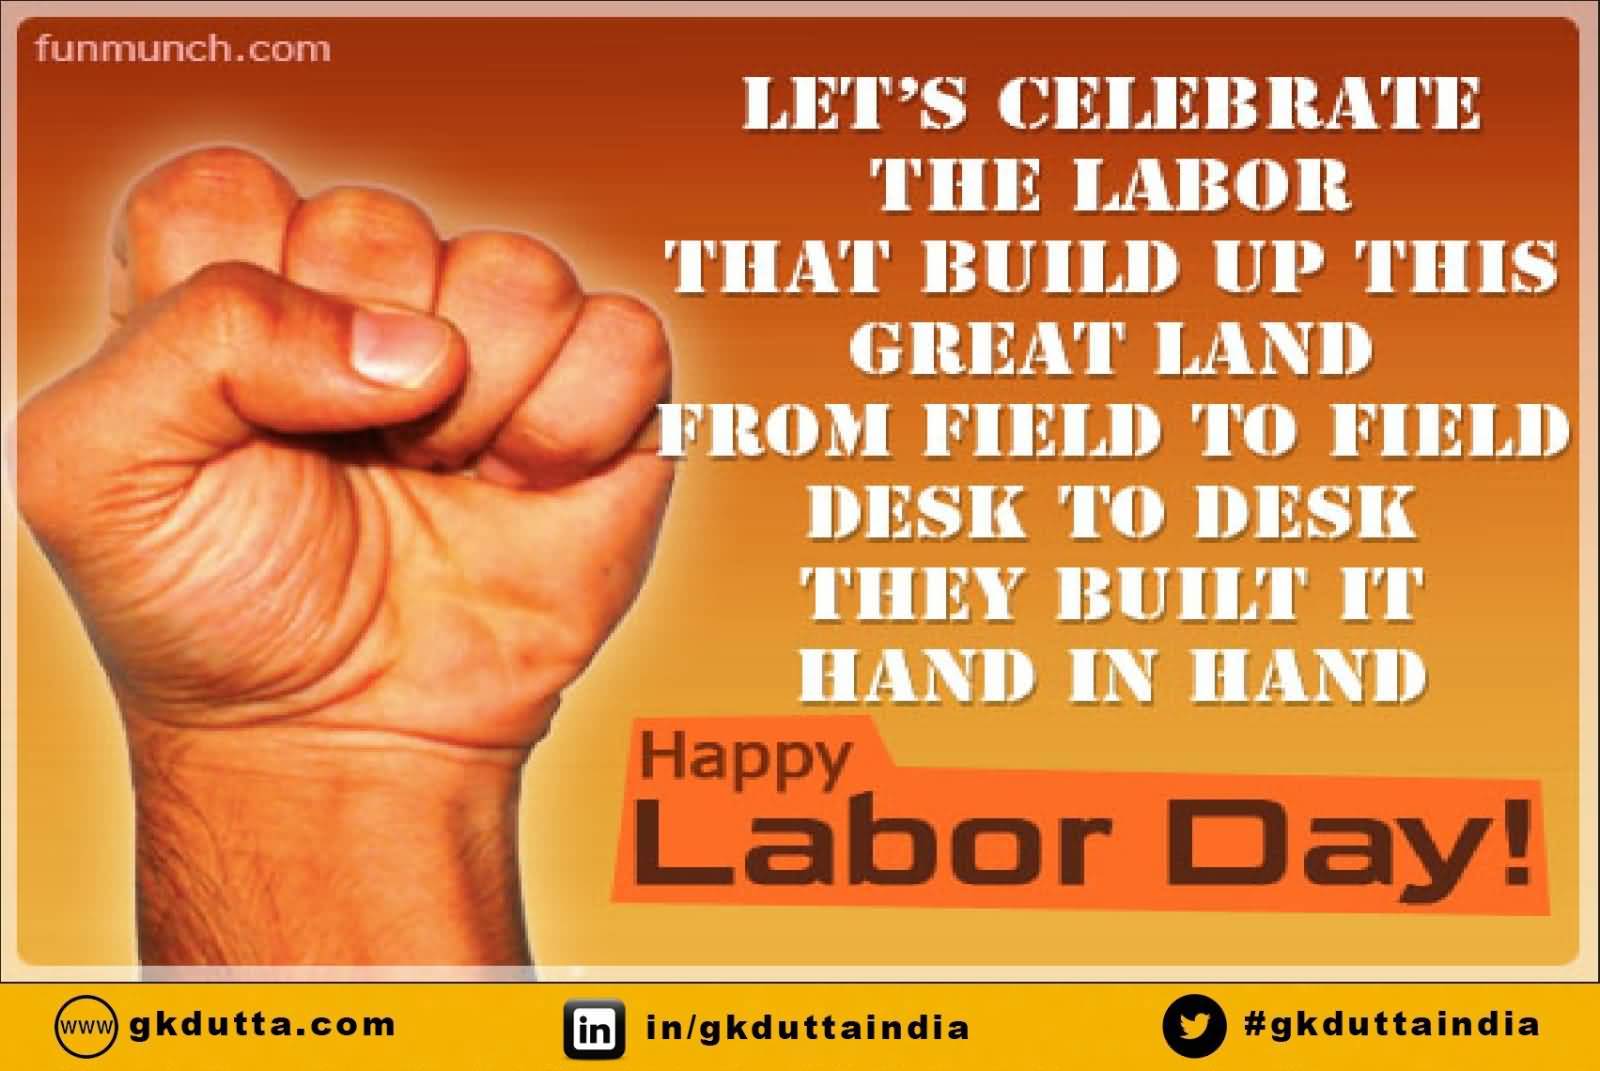 Let’s Celebrate The Labor That Build Up This Great Land From Field To Field Desk To Desk They Built It Hand In Hand Happy Labor Day